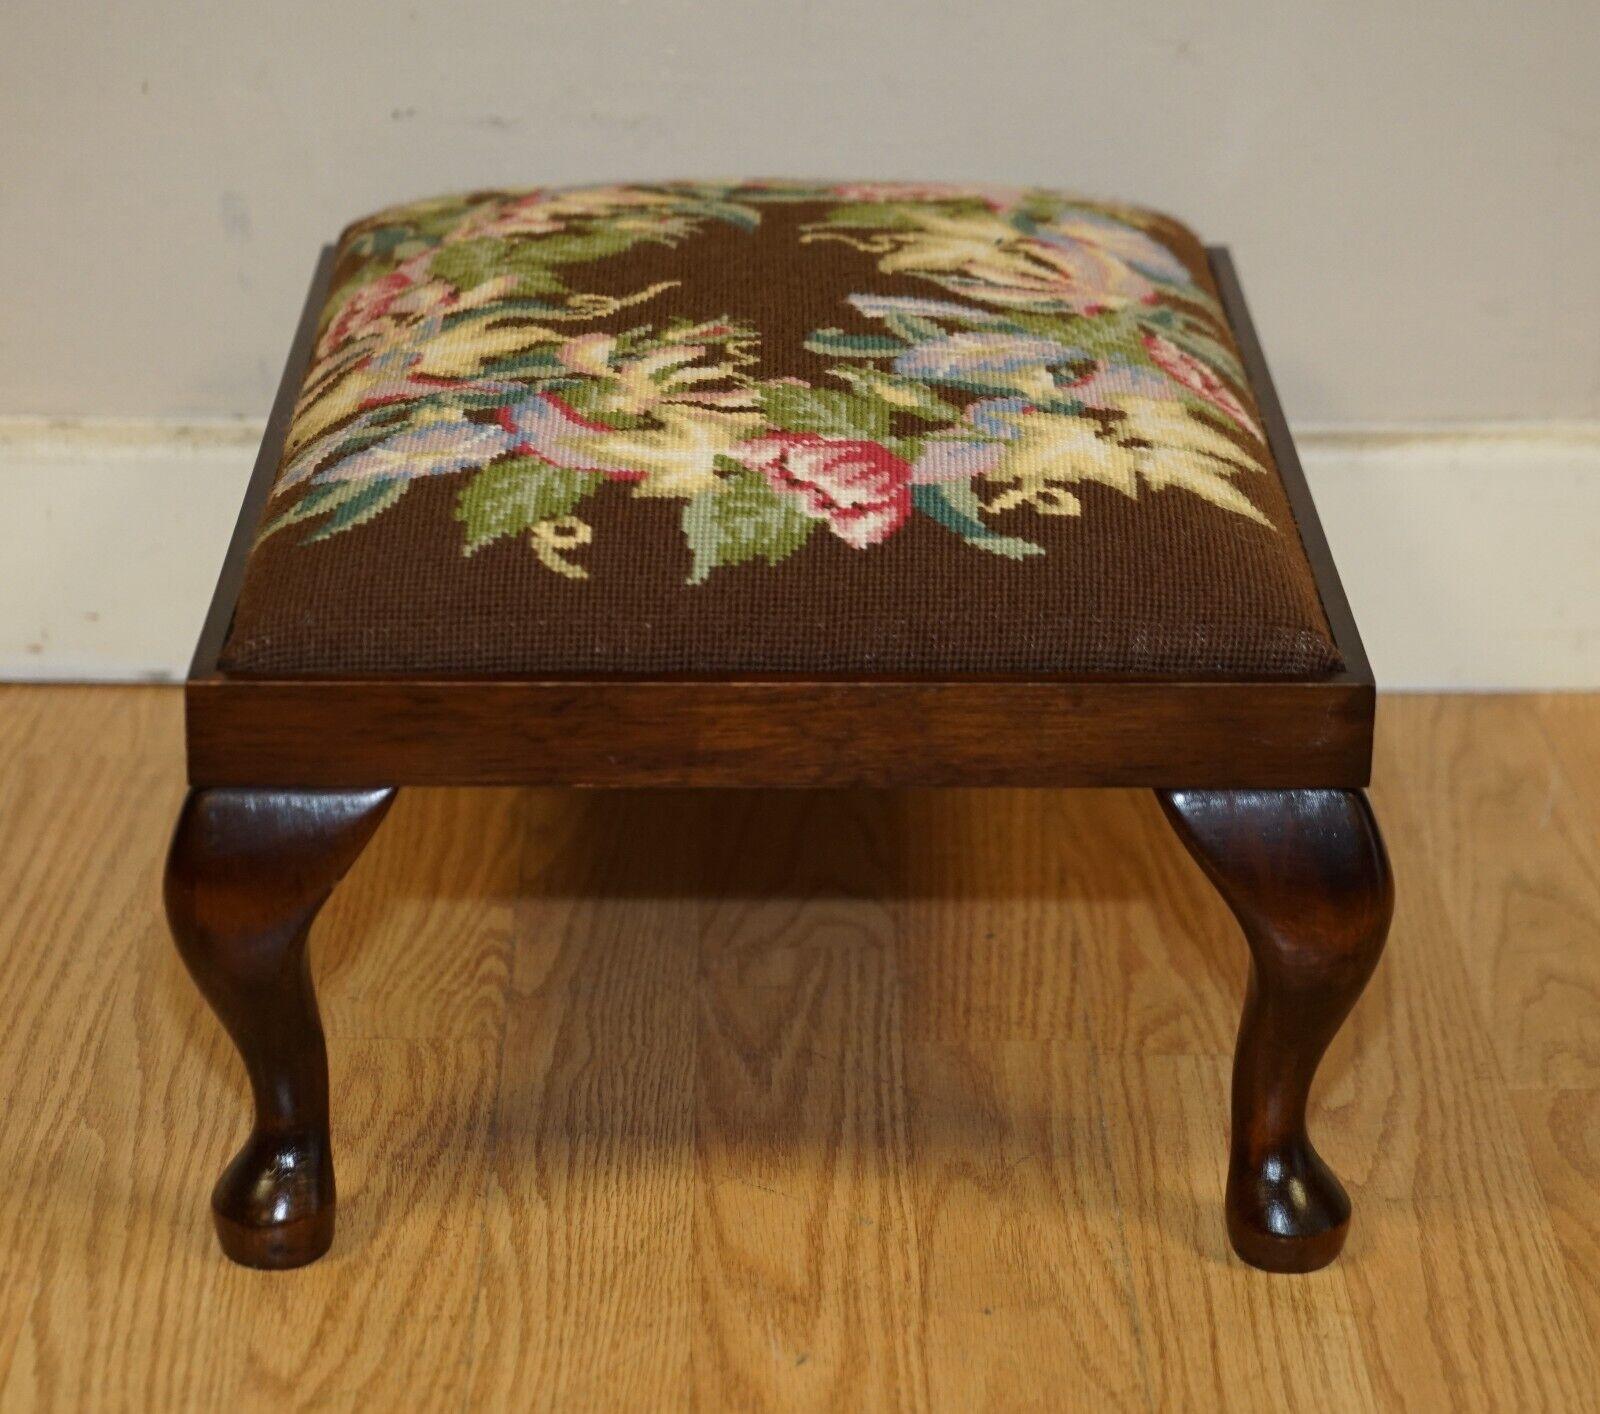 Victorian Lovely Hardwood and Embroidered Floral Vintage Footstool Stool For Sale